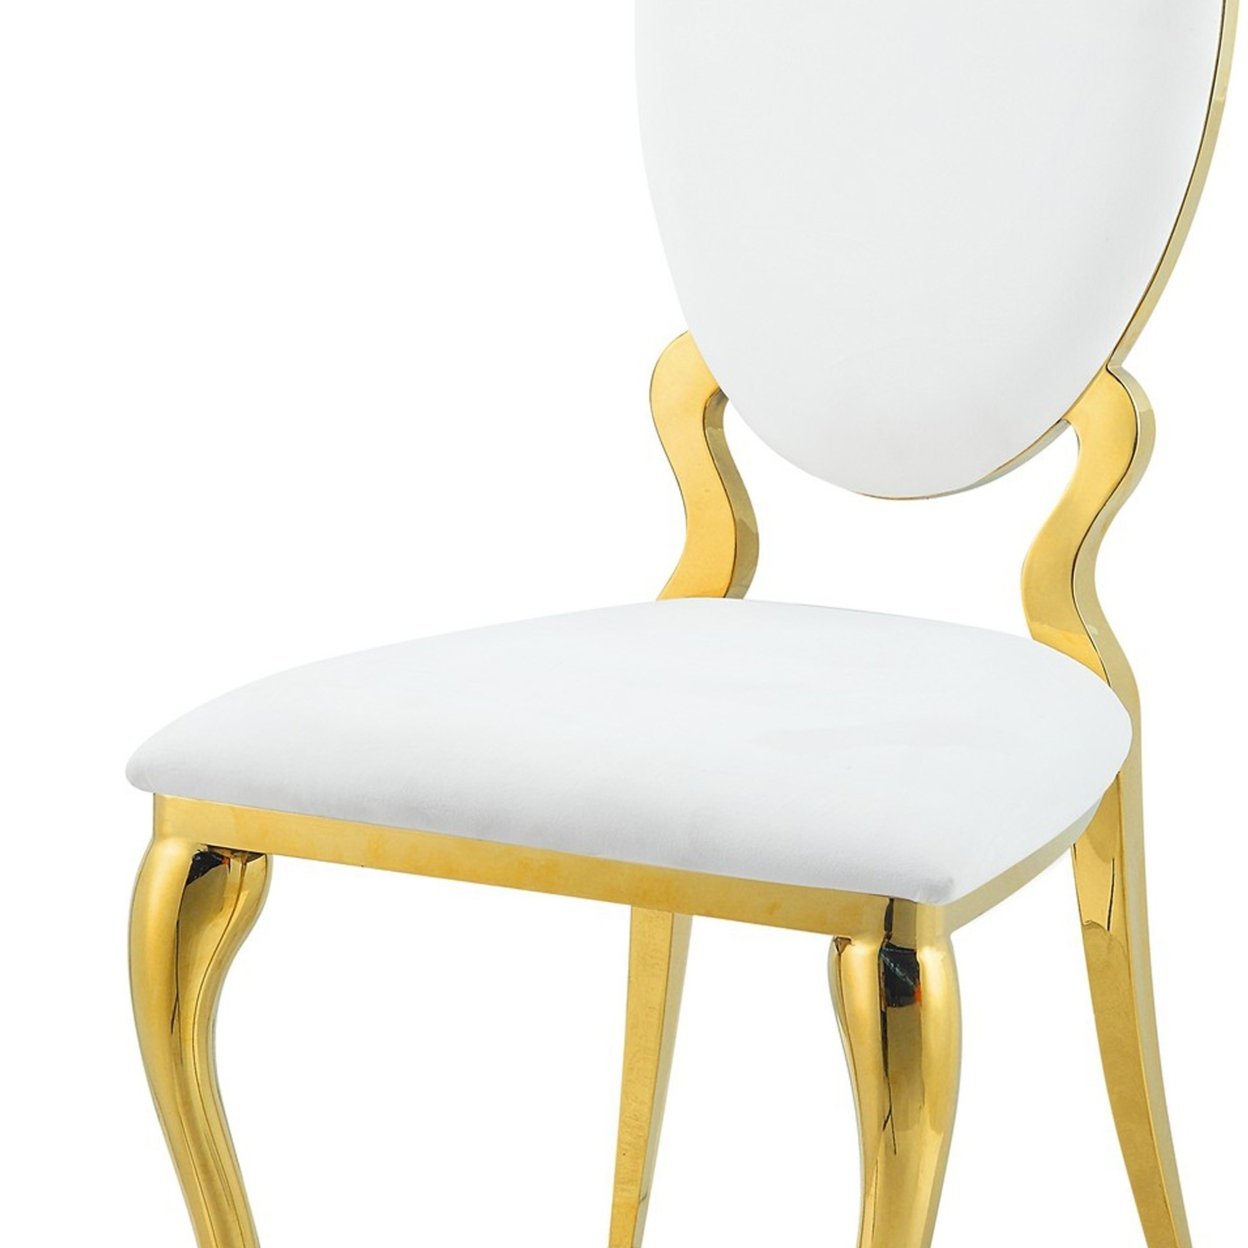 18 Inch Vegan Leather Dining Chair, Padded Back, Set Of 2, White And Gold